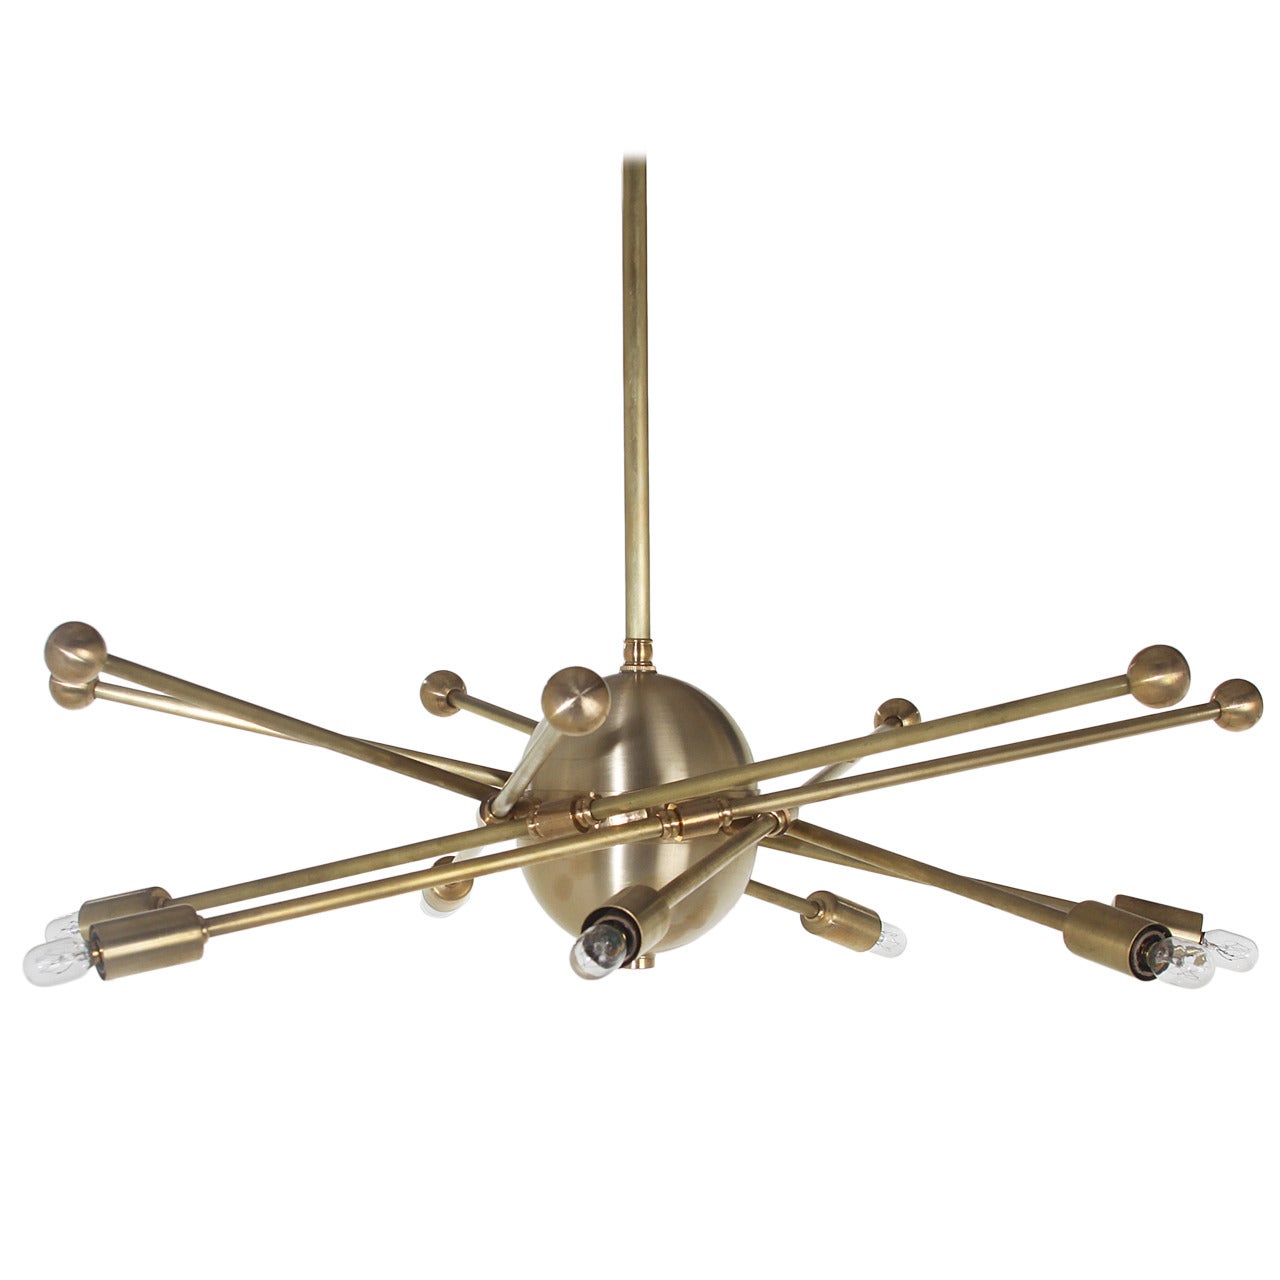 Arana Chandelier with Adjustable Arms by Thomas Hayes Studio